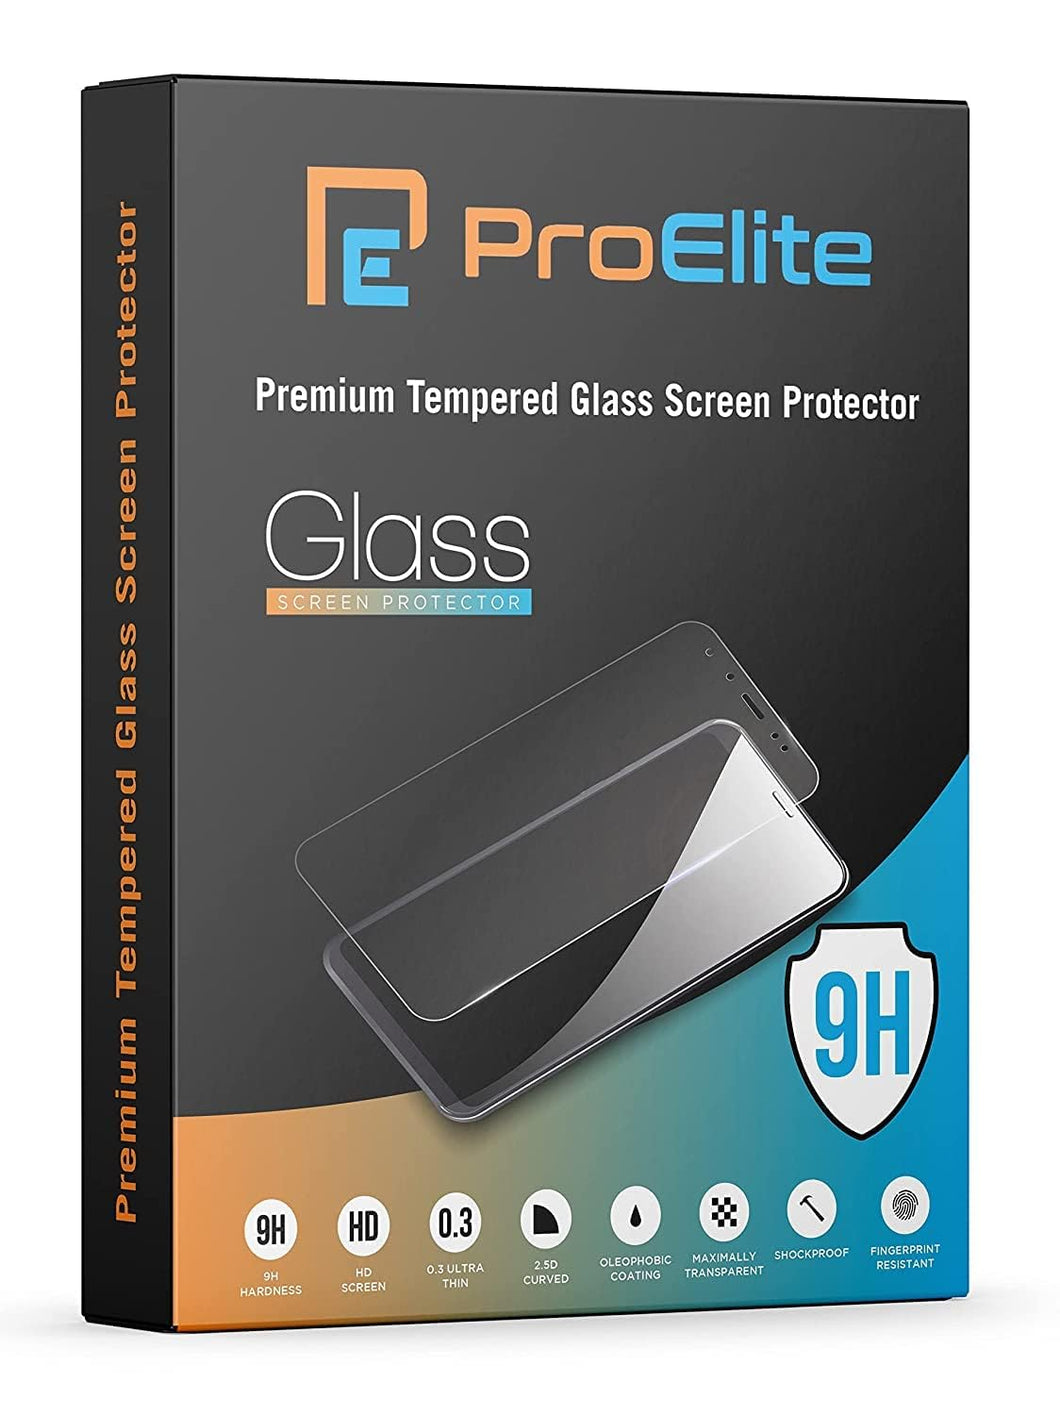 [2-Pack] ProElite Premium Tempered Glass Screen Protector for Samsung Galaxy Tab S6 Lite 10.4 inch SM-P610/P615